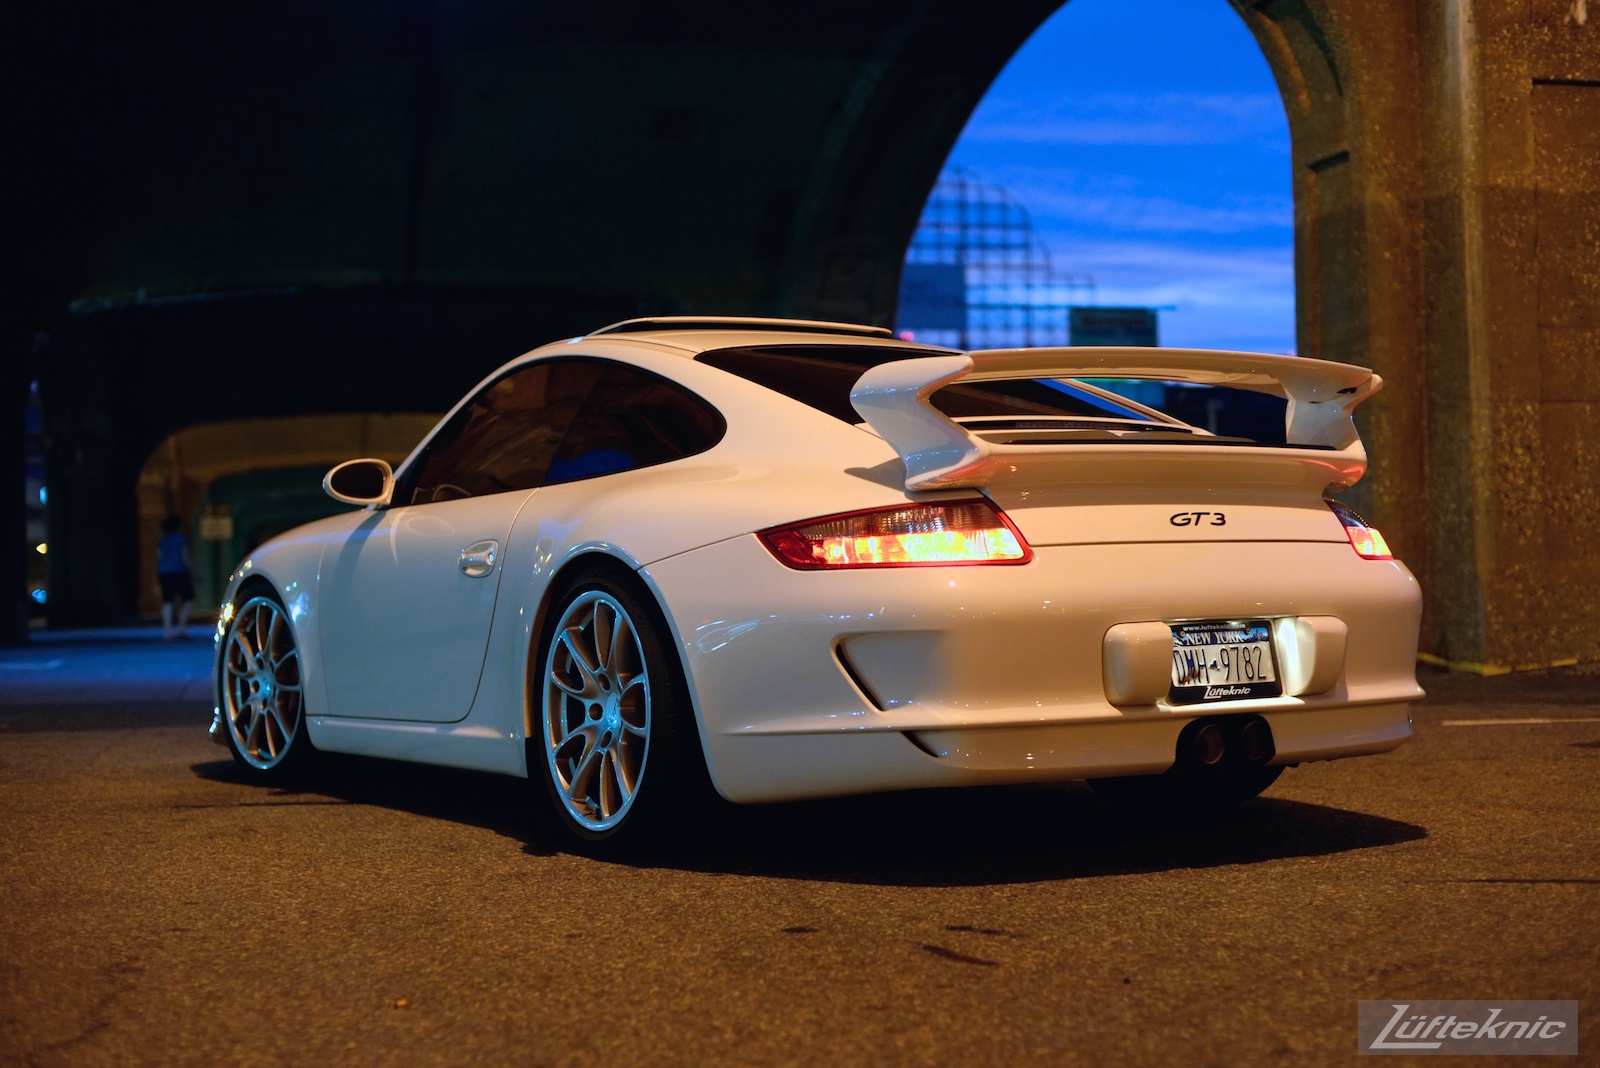 A white 997 GT3 viewed from behind under the 7 train bridge on Queens blvd at night.